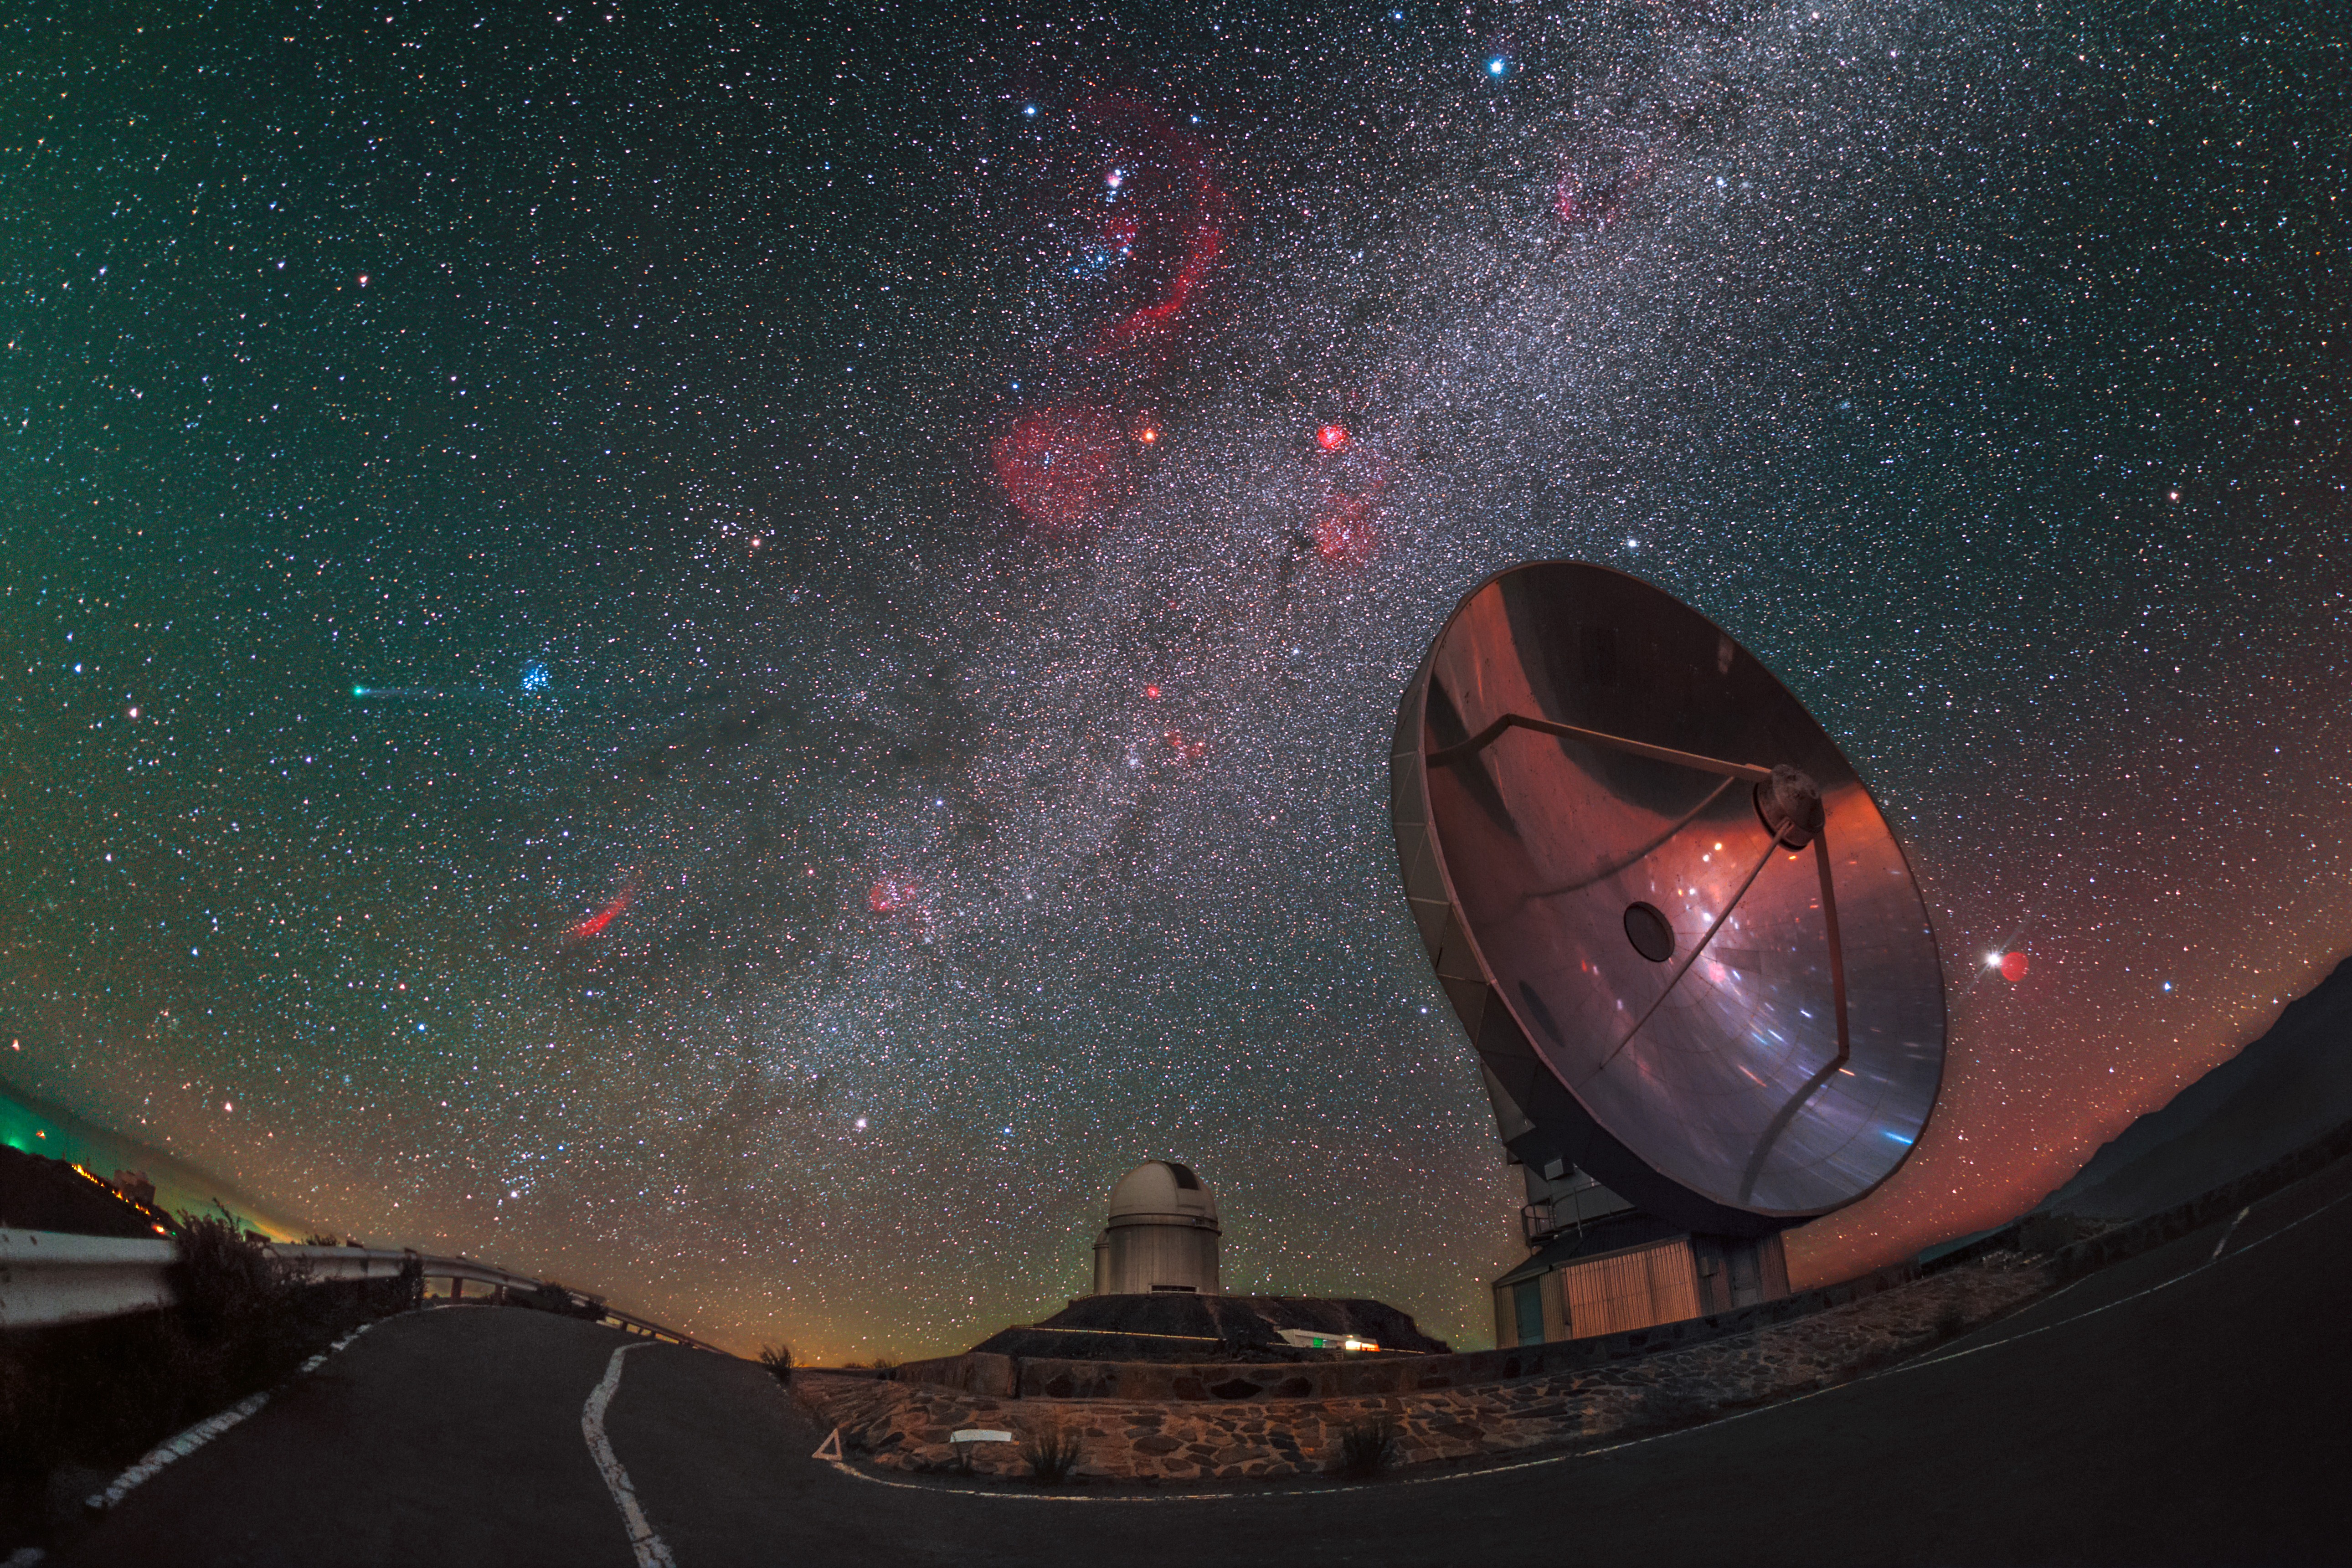 photography, Landscape, Nature, Observatory, Technology, Milky Way, Galaxy, Starry night, Road, Asphalt, Long exposure, Astronomy, Chile Wallpaper